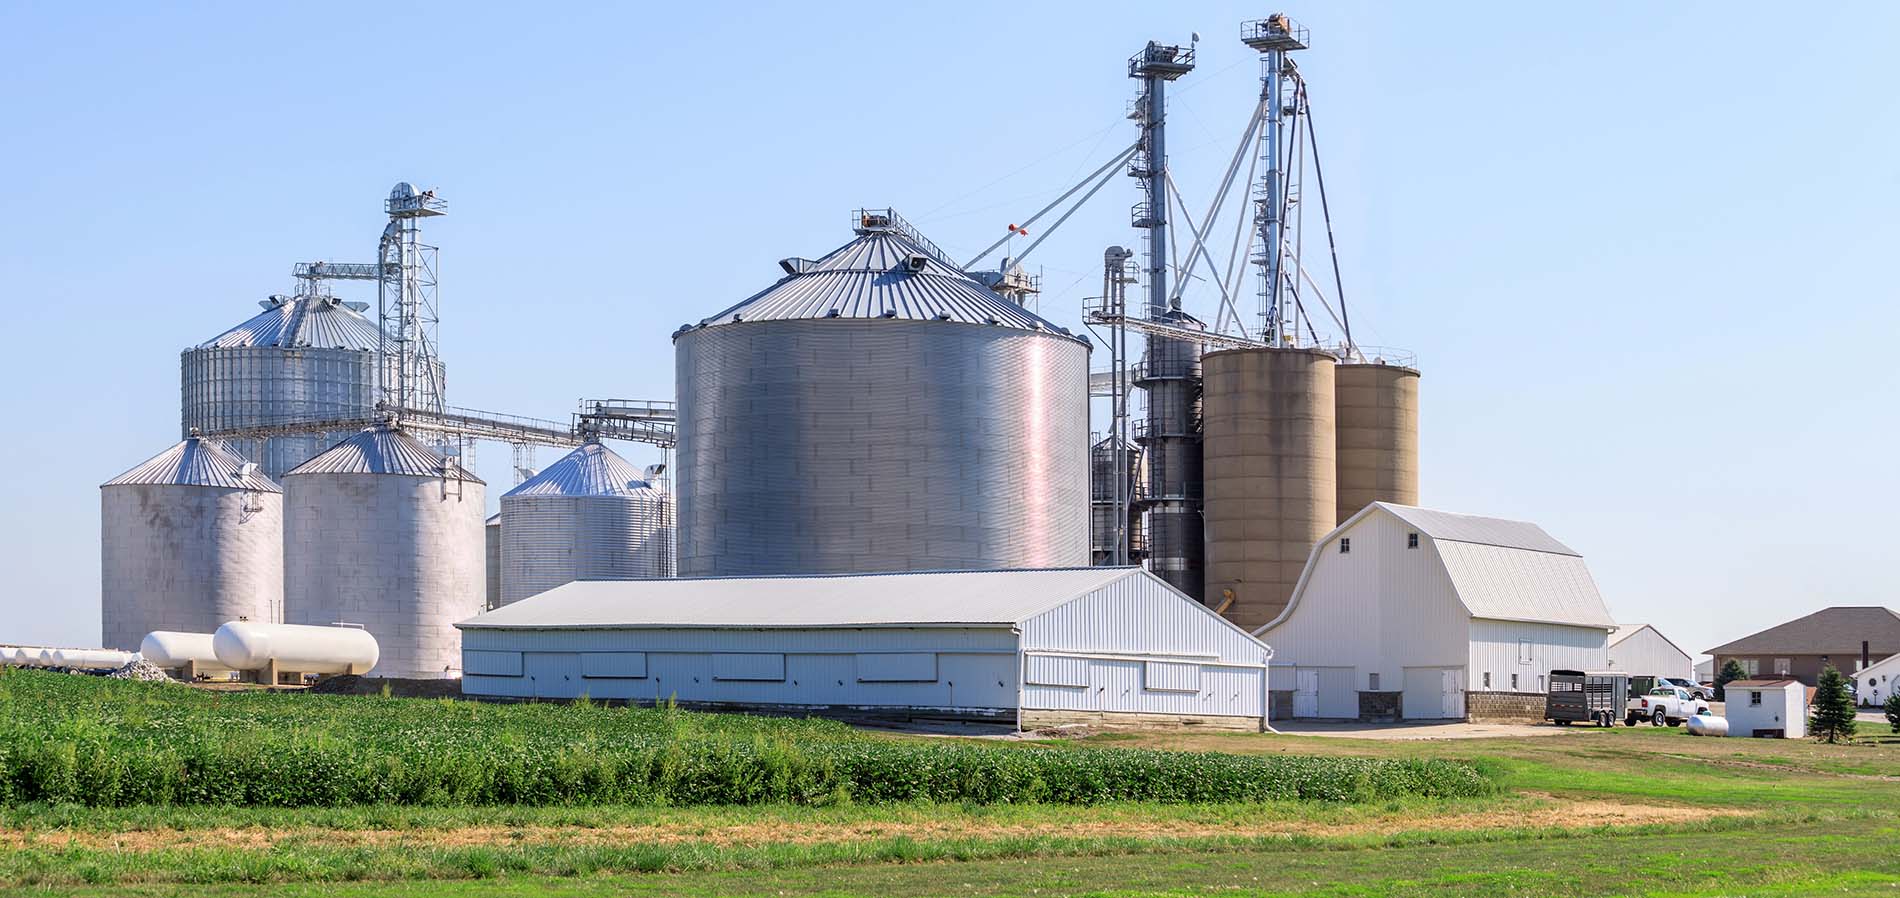 Agricultural Silos and Material Conveyance